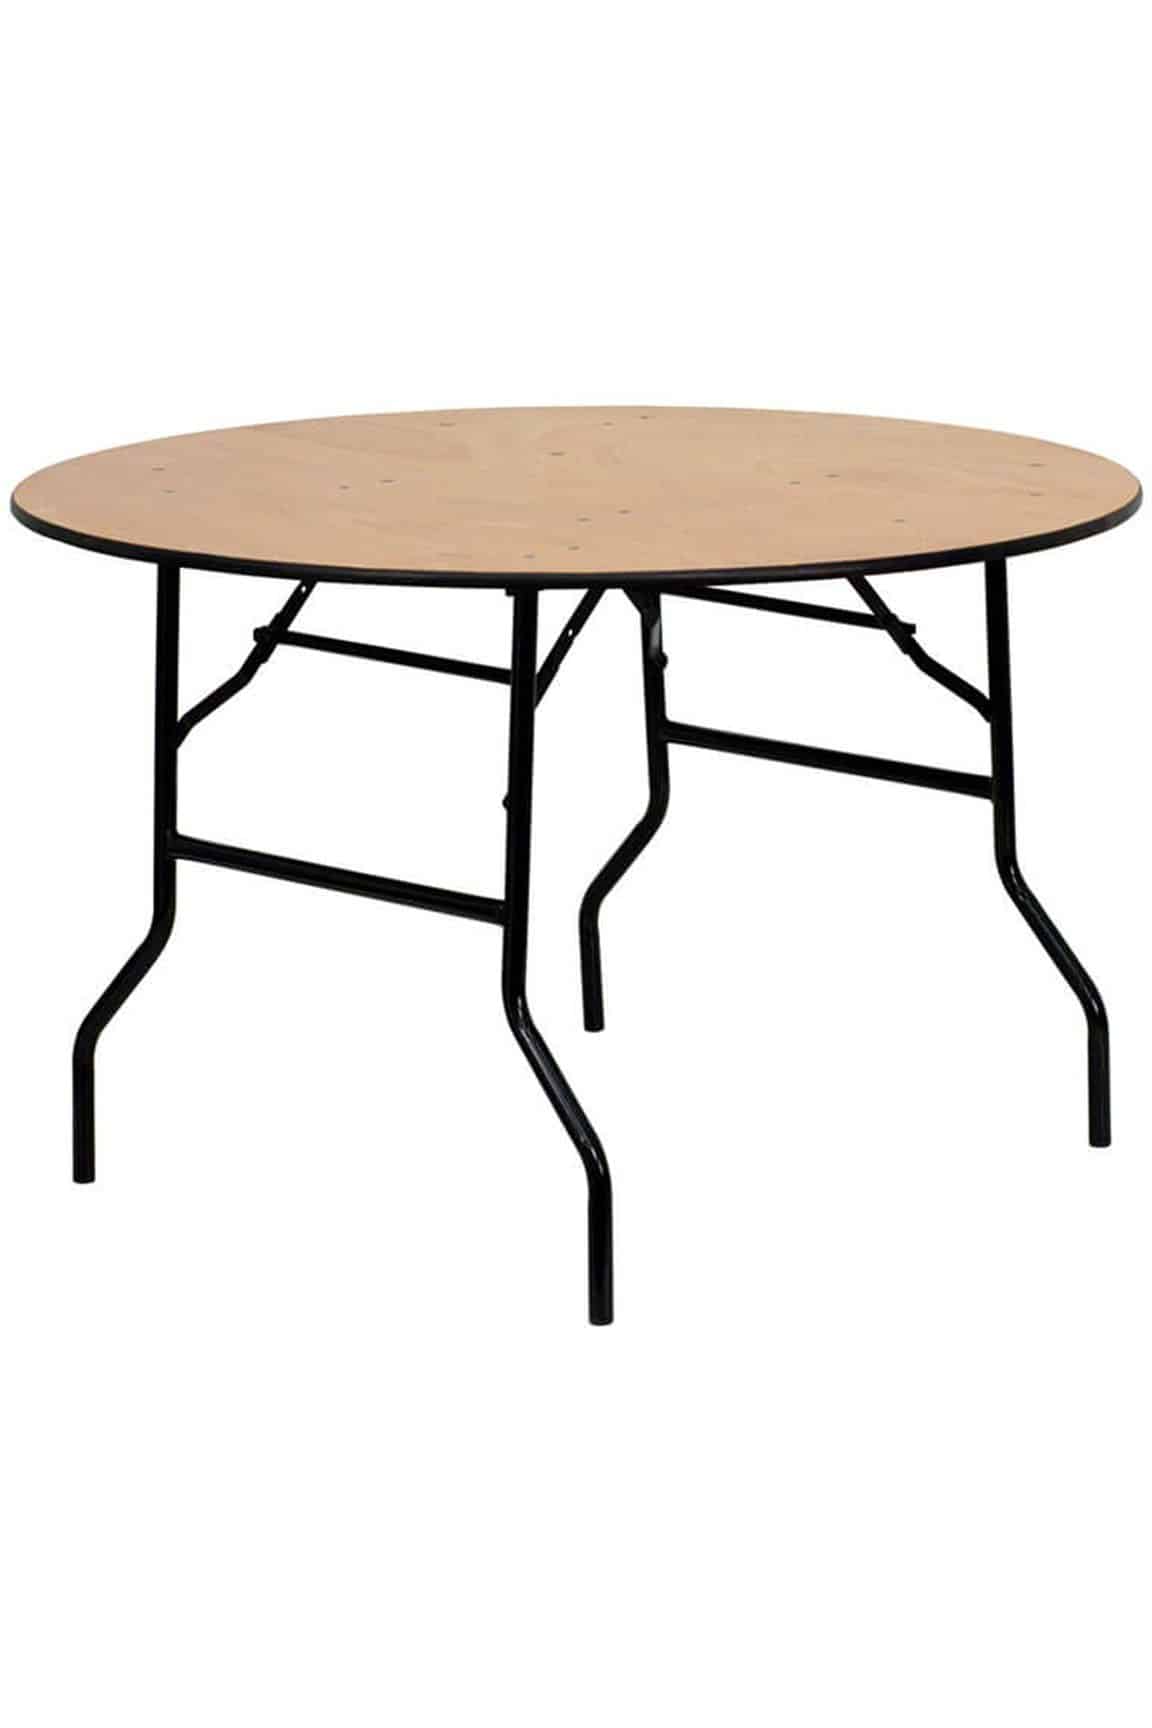 5ft 6in Round Table Hire Beds Herts, 5ft Round Table